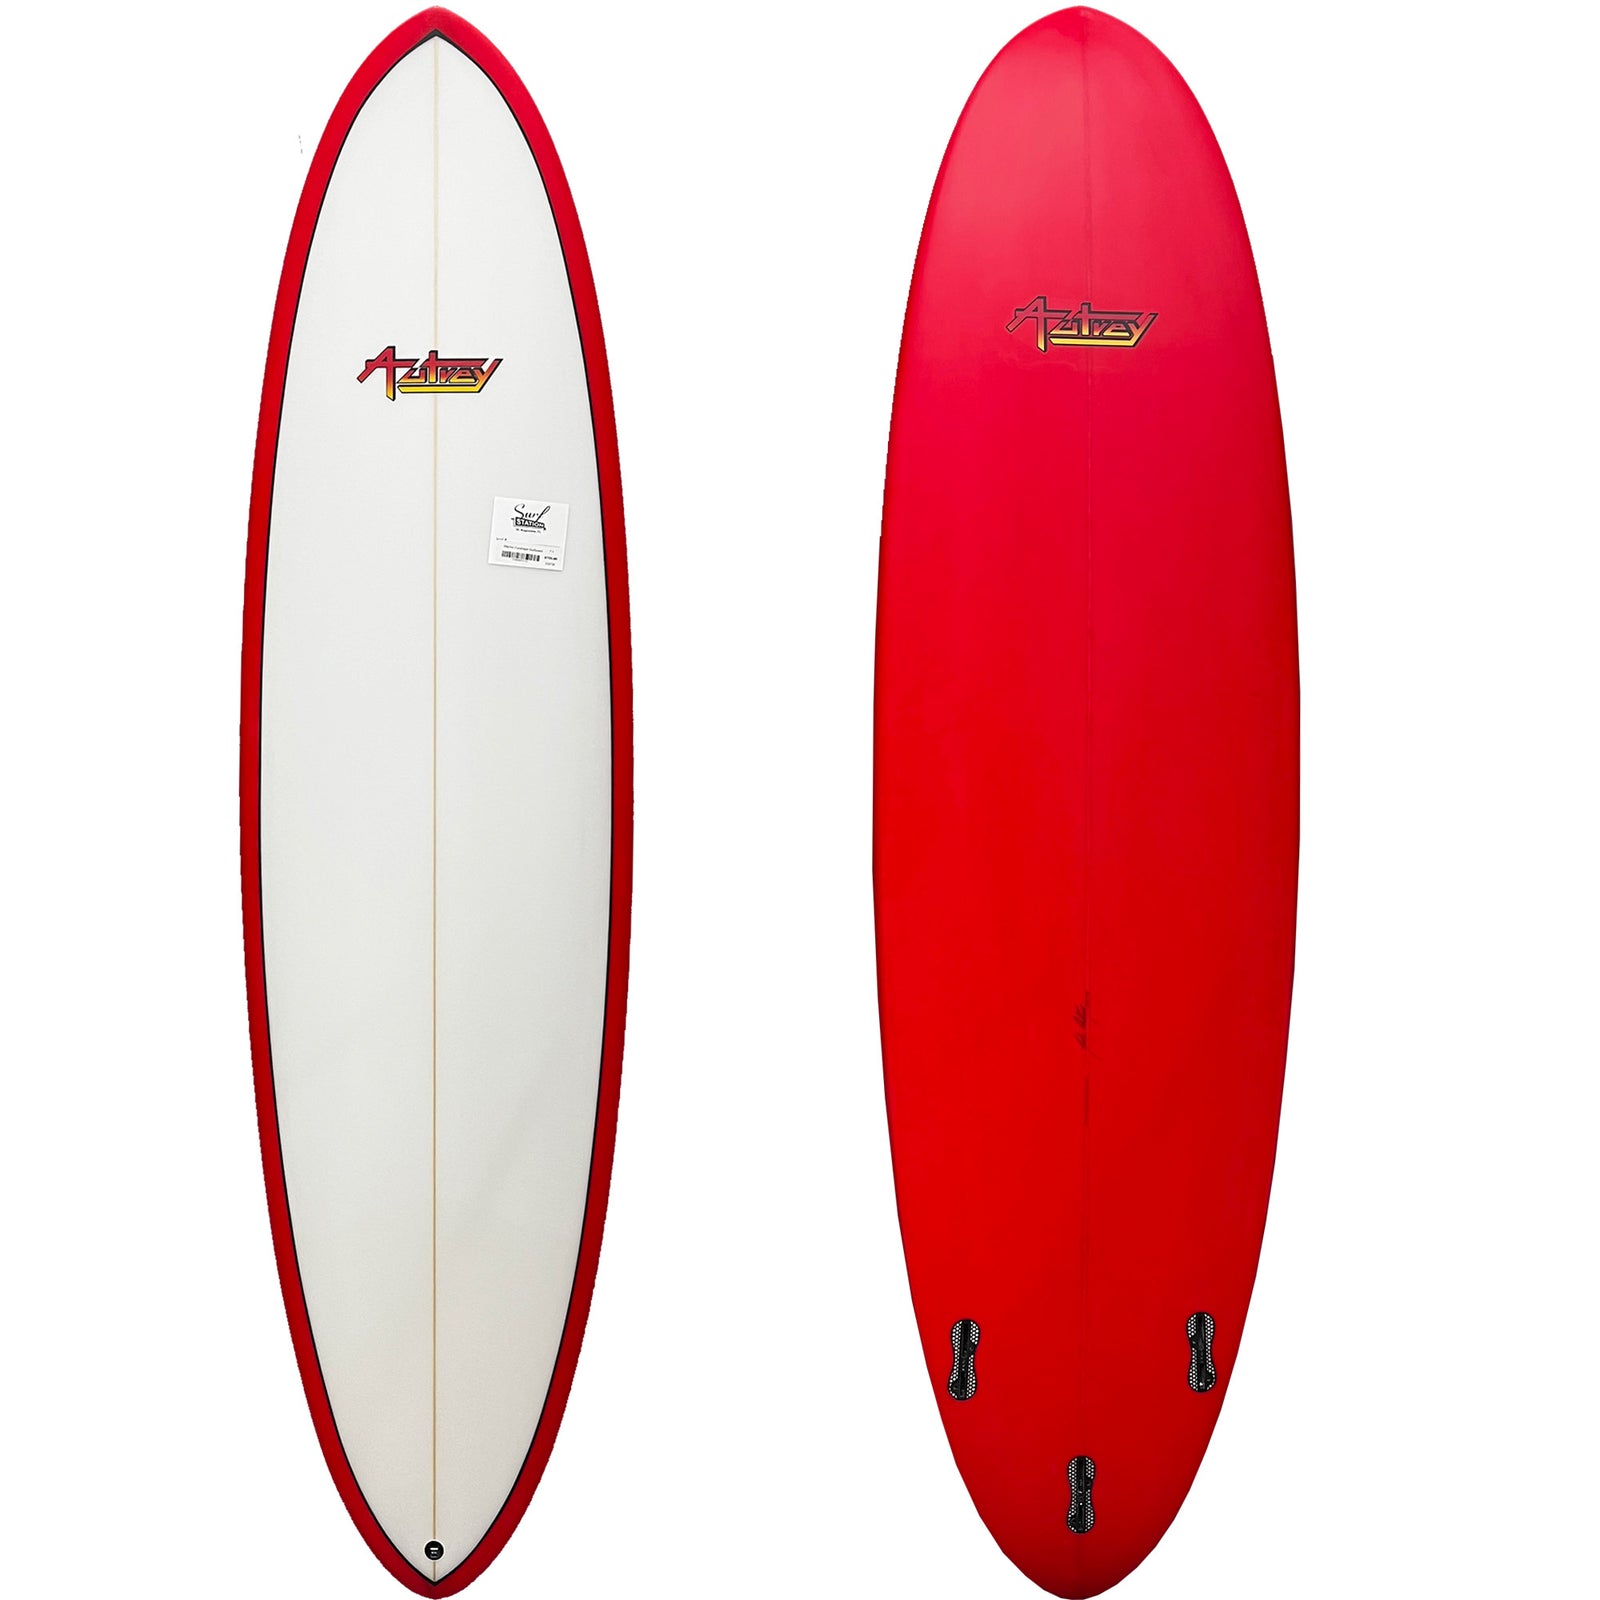 $600 to $700 - Surf Station Store